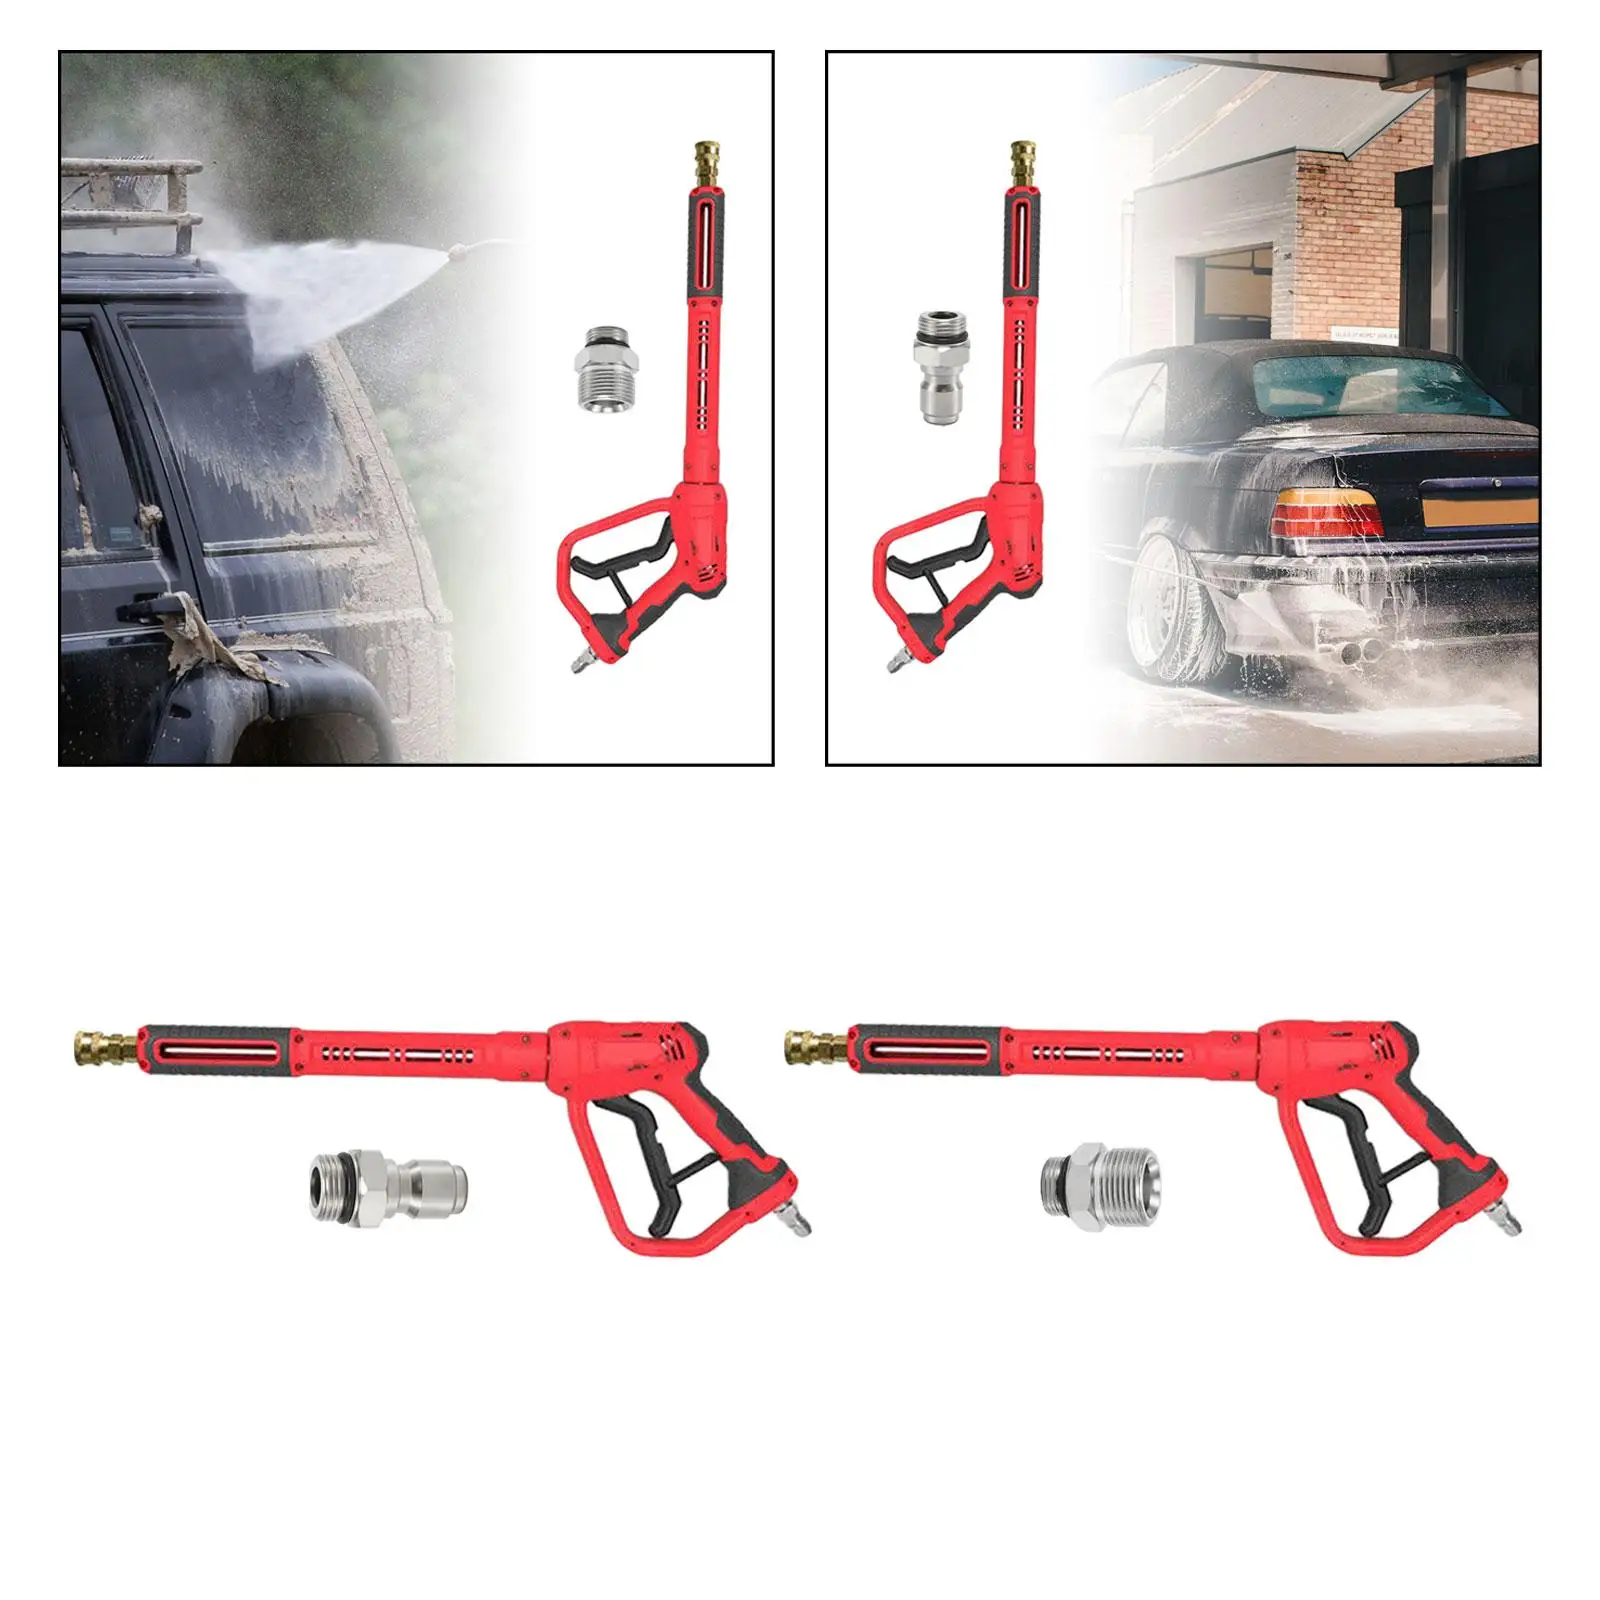 High Pressure Washer Sprinkler Replacement Fitting Car Wash Accessories Comfortable Handle High Pressure Sprayer for Lawns Care